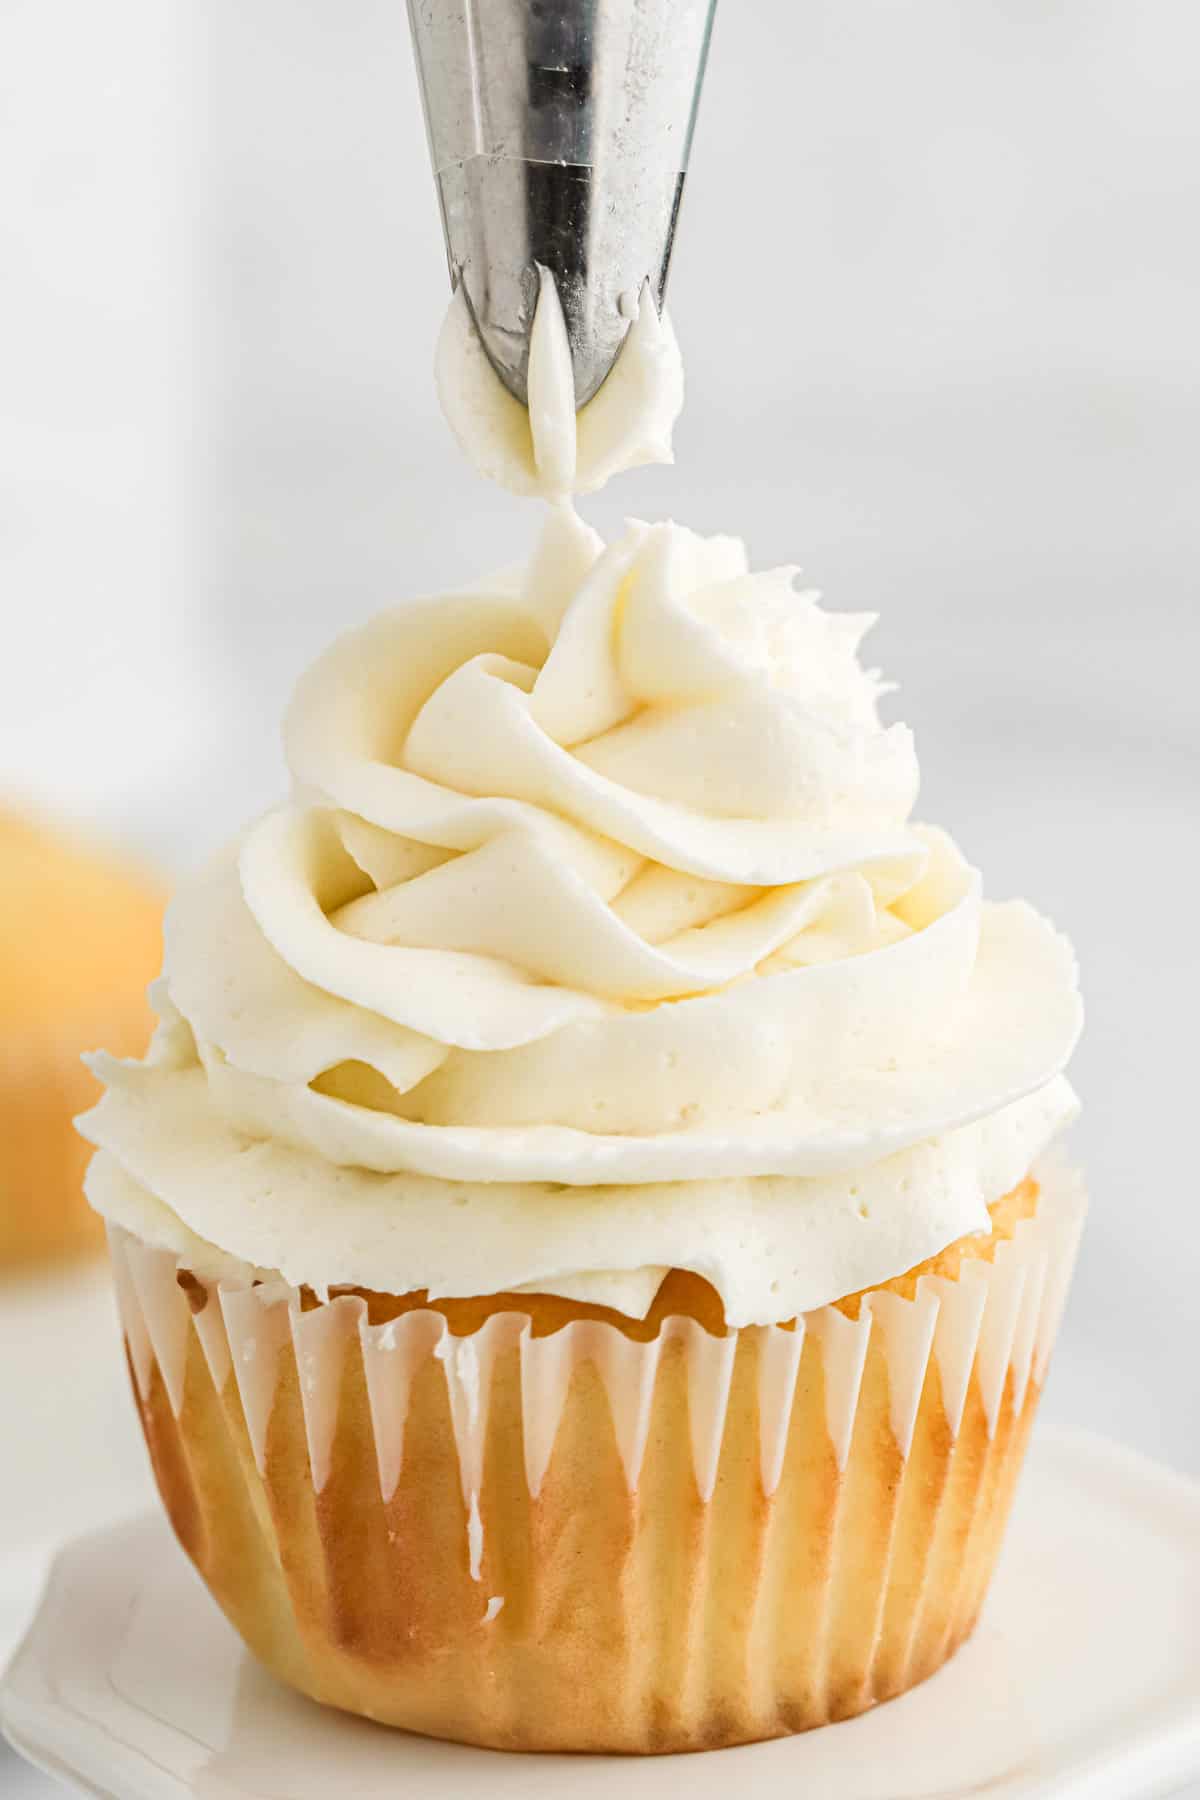 Piping a cupcake with American buttercream frosting.